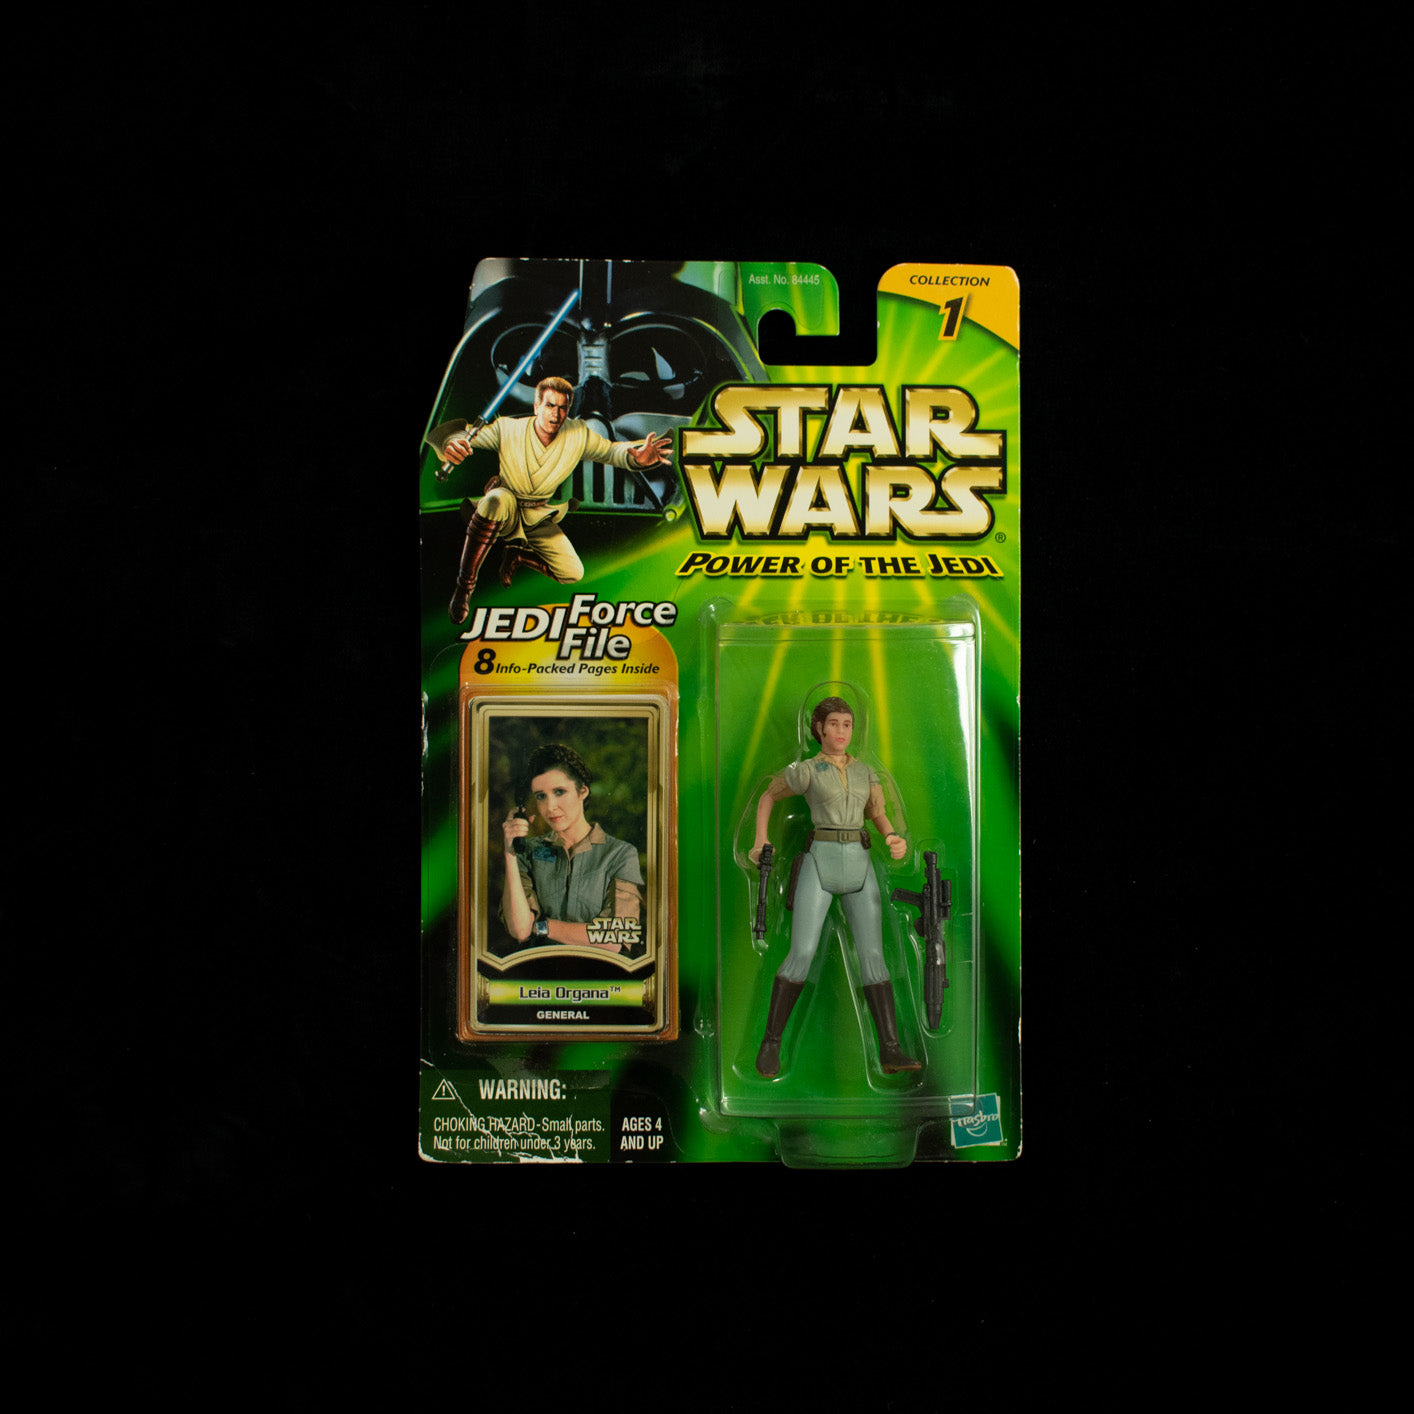 Leia Organa General Power of the Jedi Star Wars Action Figure